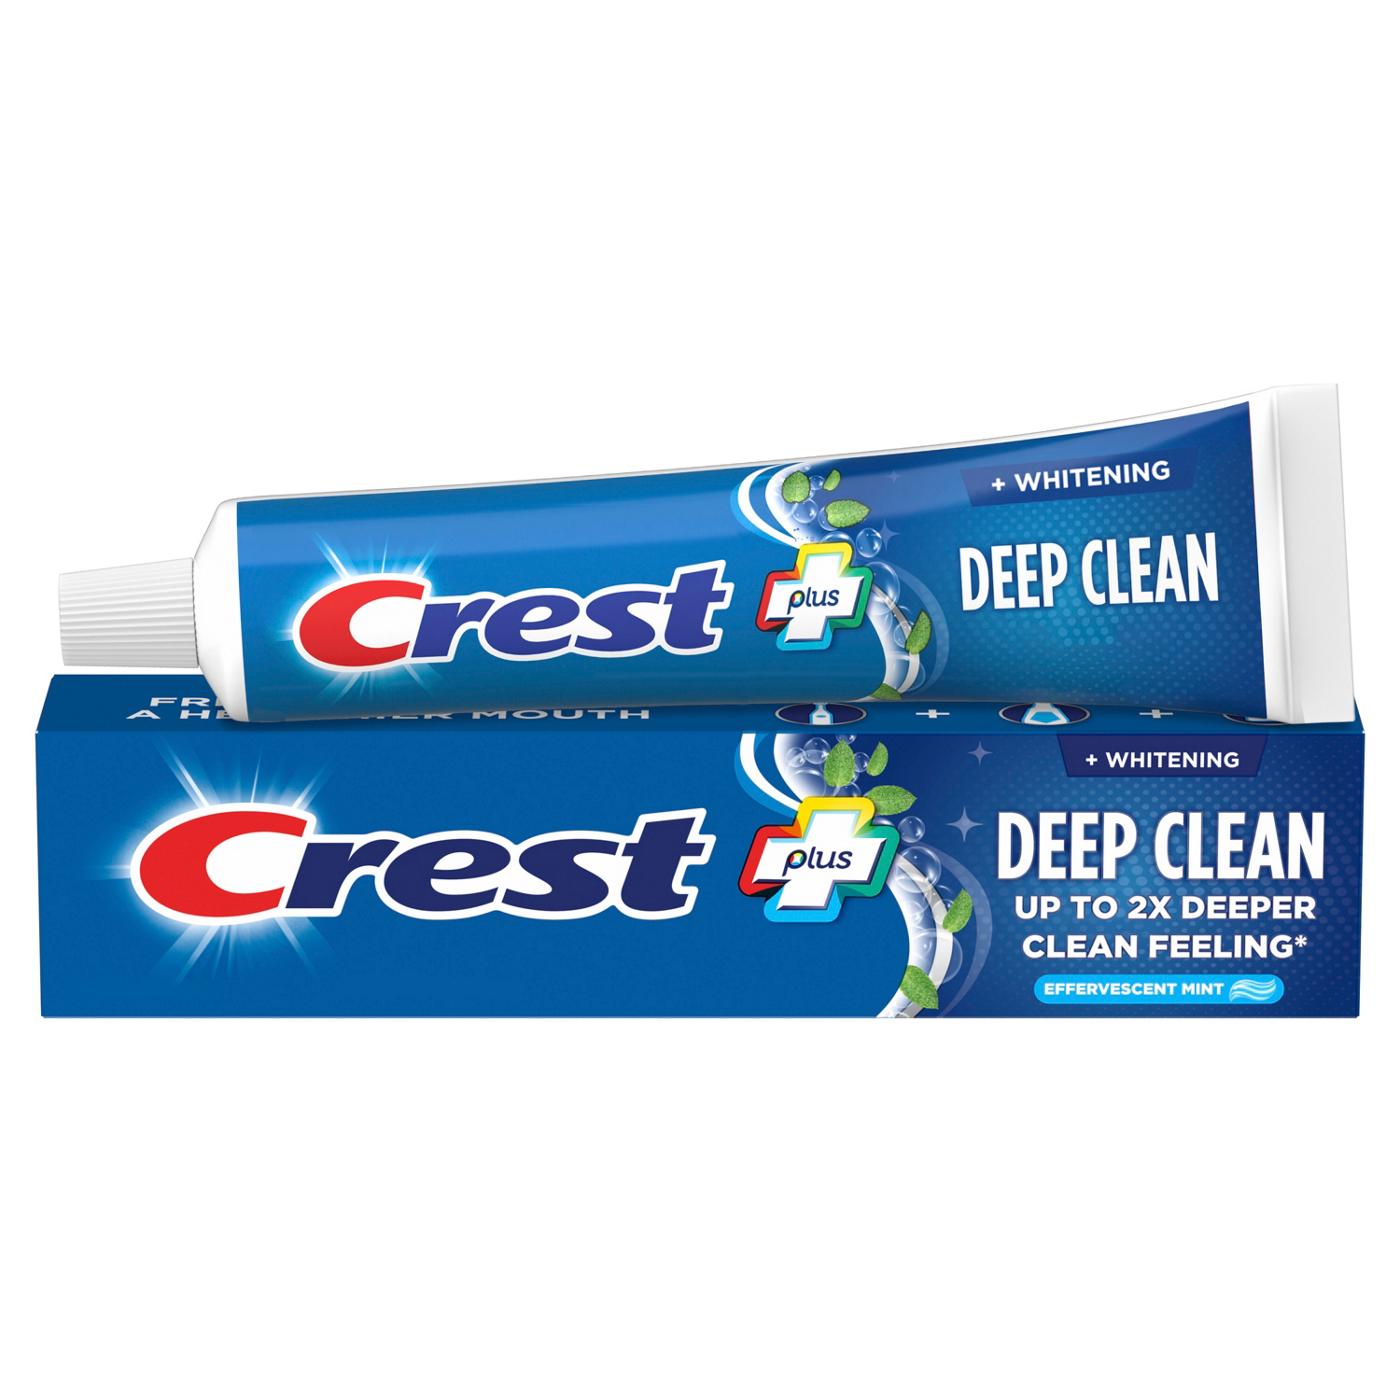 Crest Complete + Deep Clean Whitening Toothpaste - Effervescent Mint; image 3 of 10